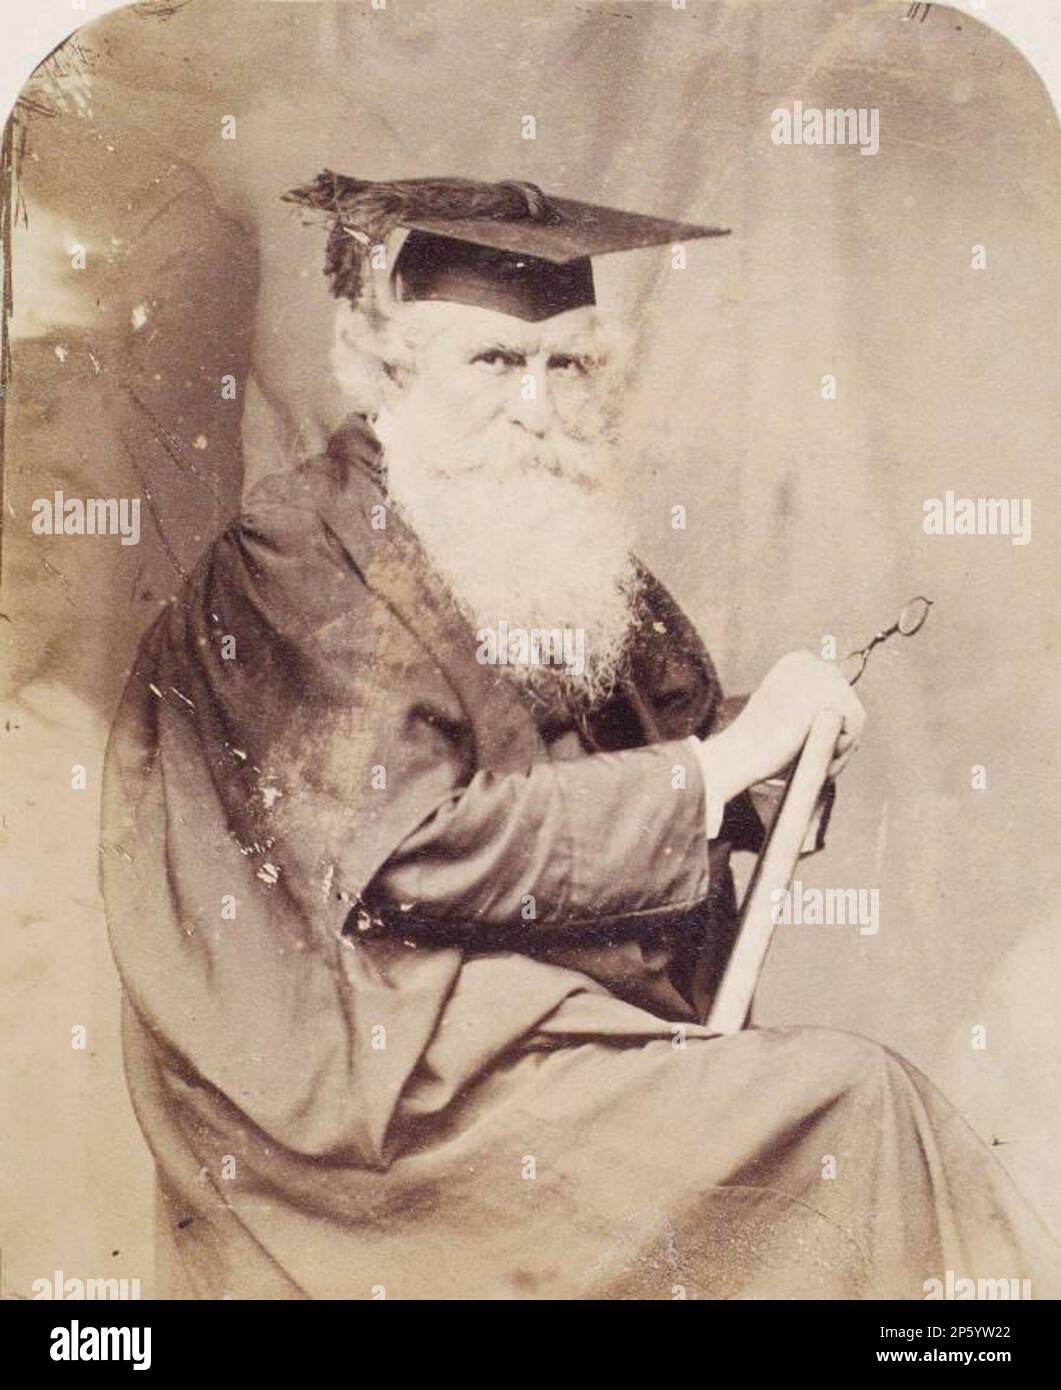 Thomas Combe in Cloak and Mortar Board, from an album compiled by Sir John Everett Millais, Charles Dodgson (Daresbury, Cheshire, England, 1832 - 1898) 30 June 1860 Stock Photo